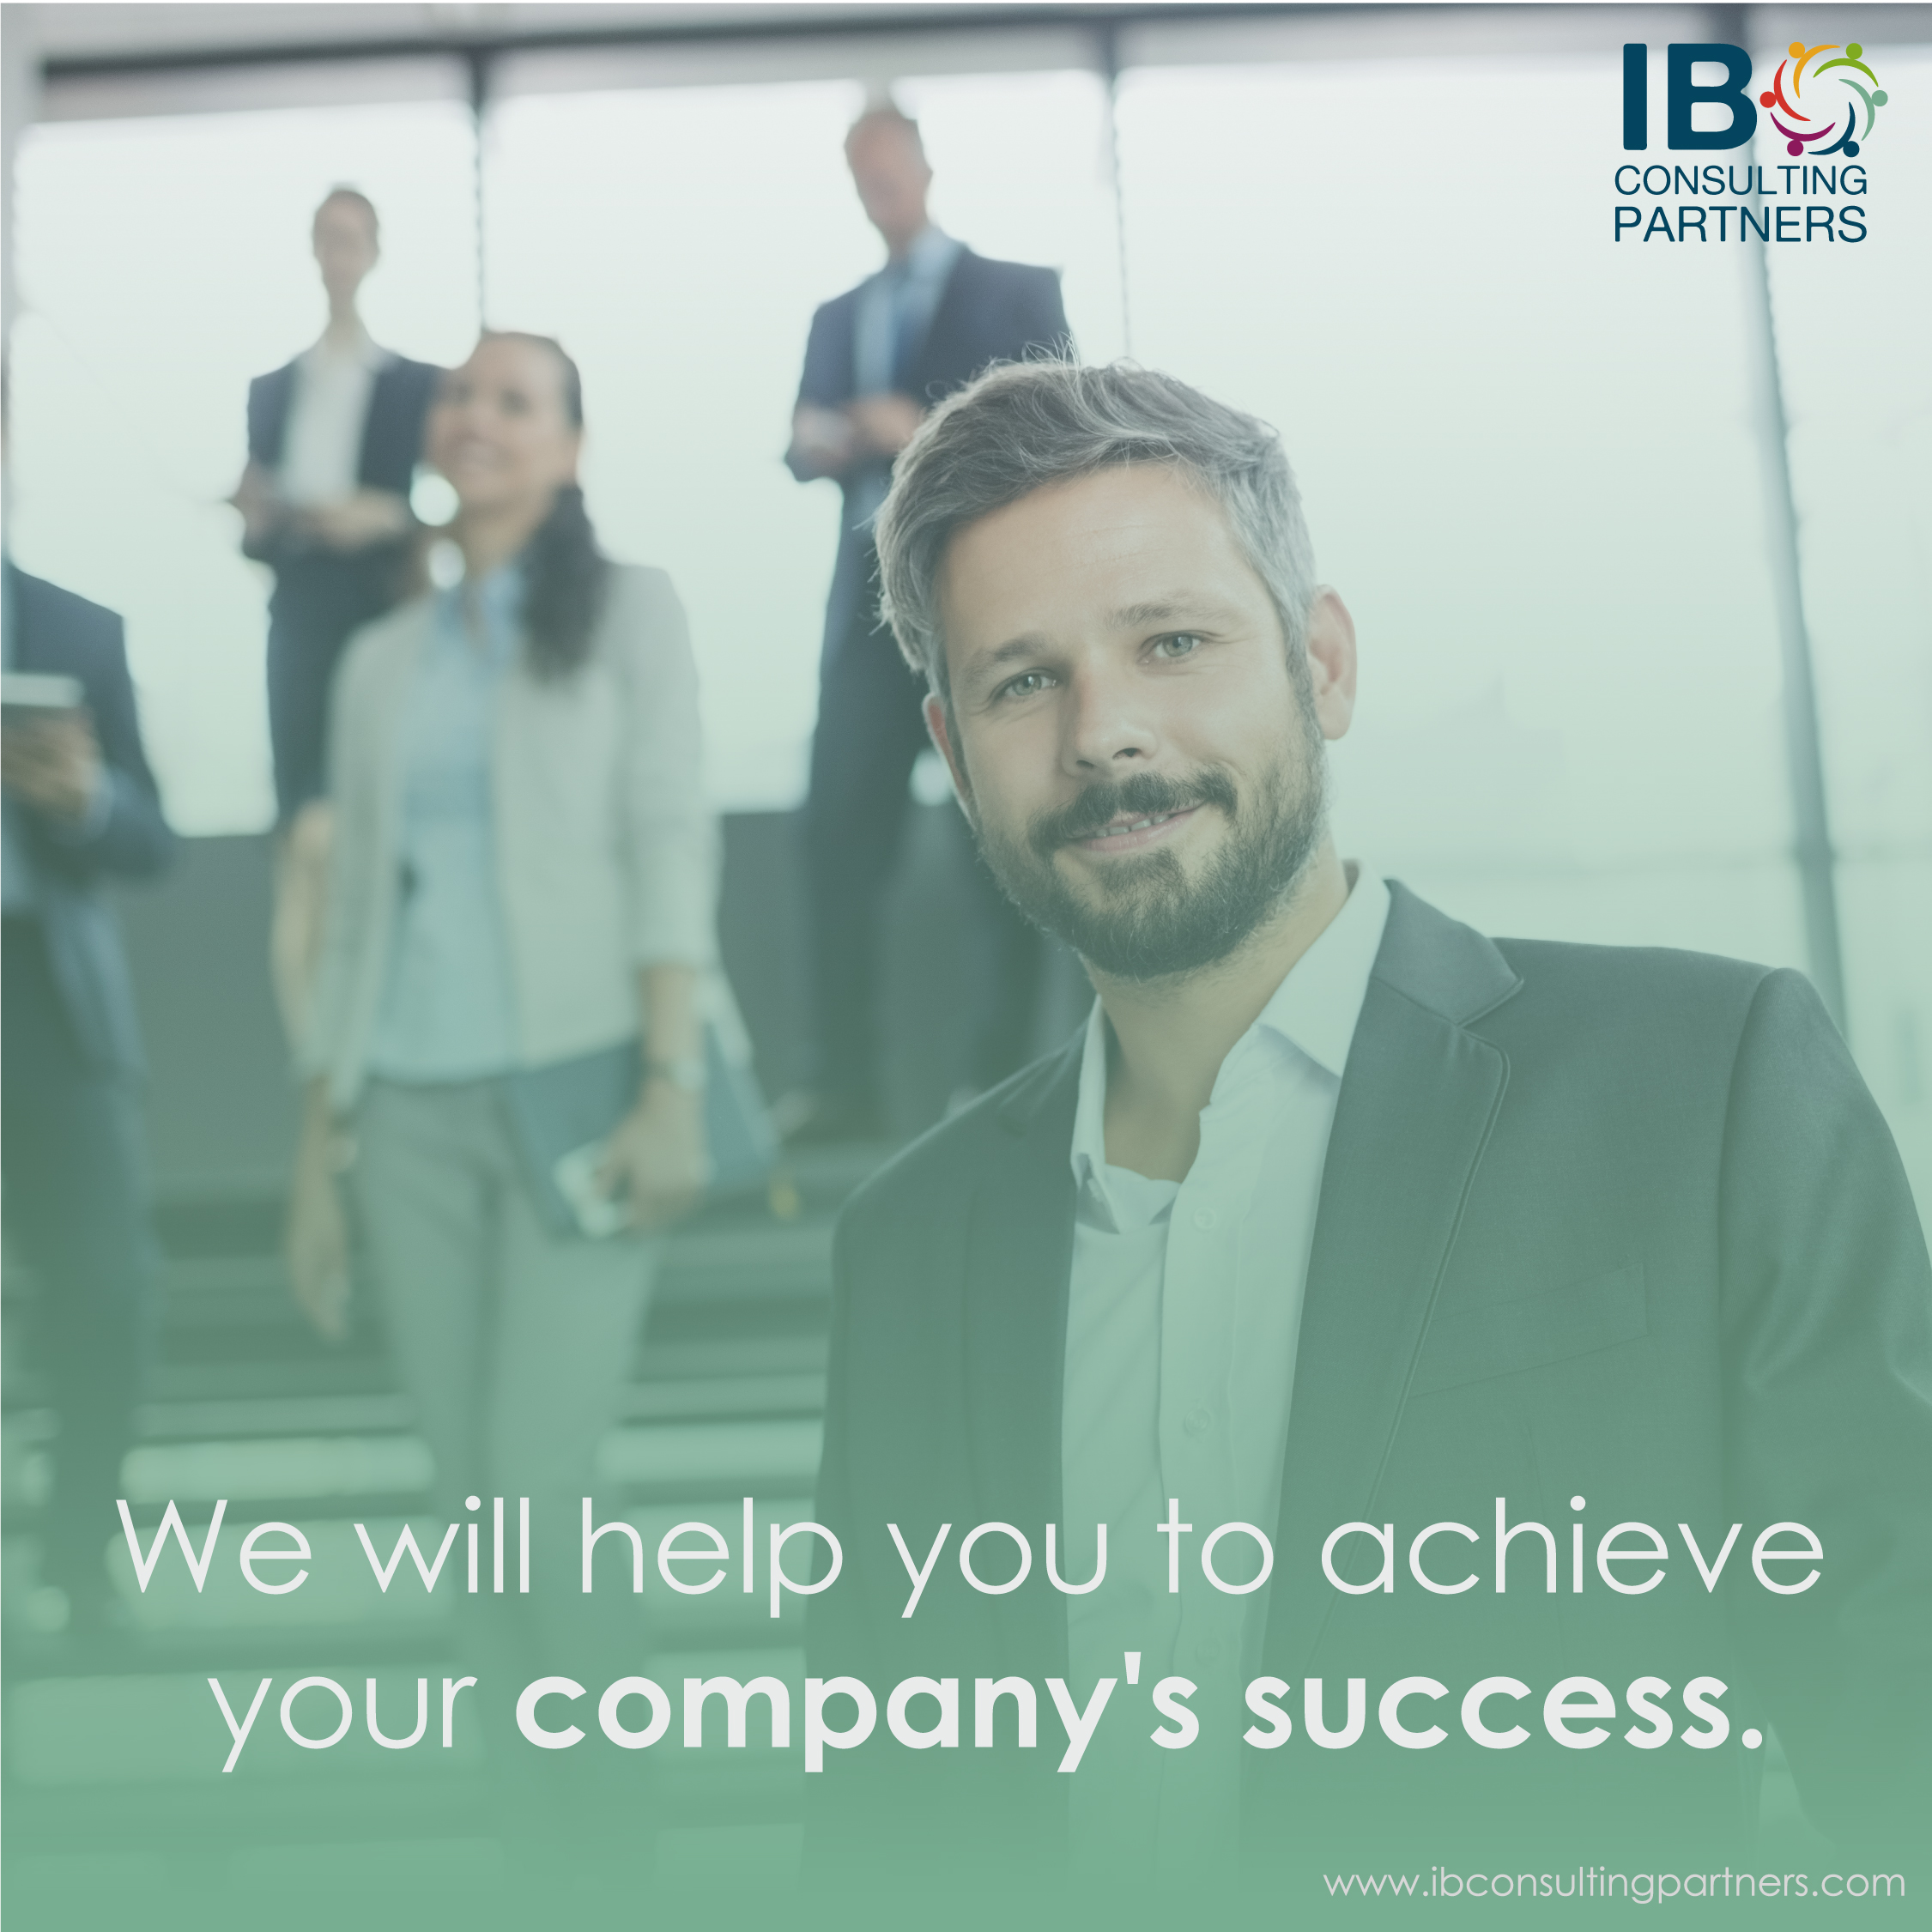 IB Consulting Partners Name We will help and guide your company's team, by our business consulting services in areas like: sales, digital marketing, strategic planning, training, logisitcs and more.